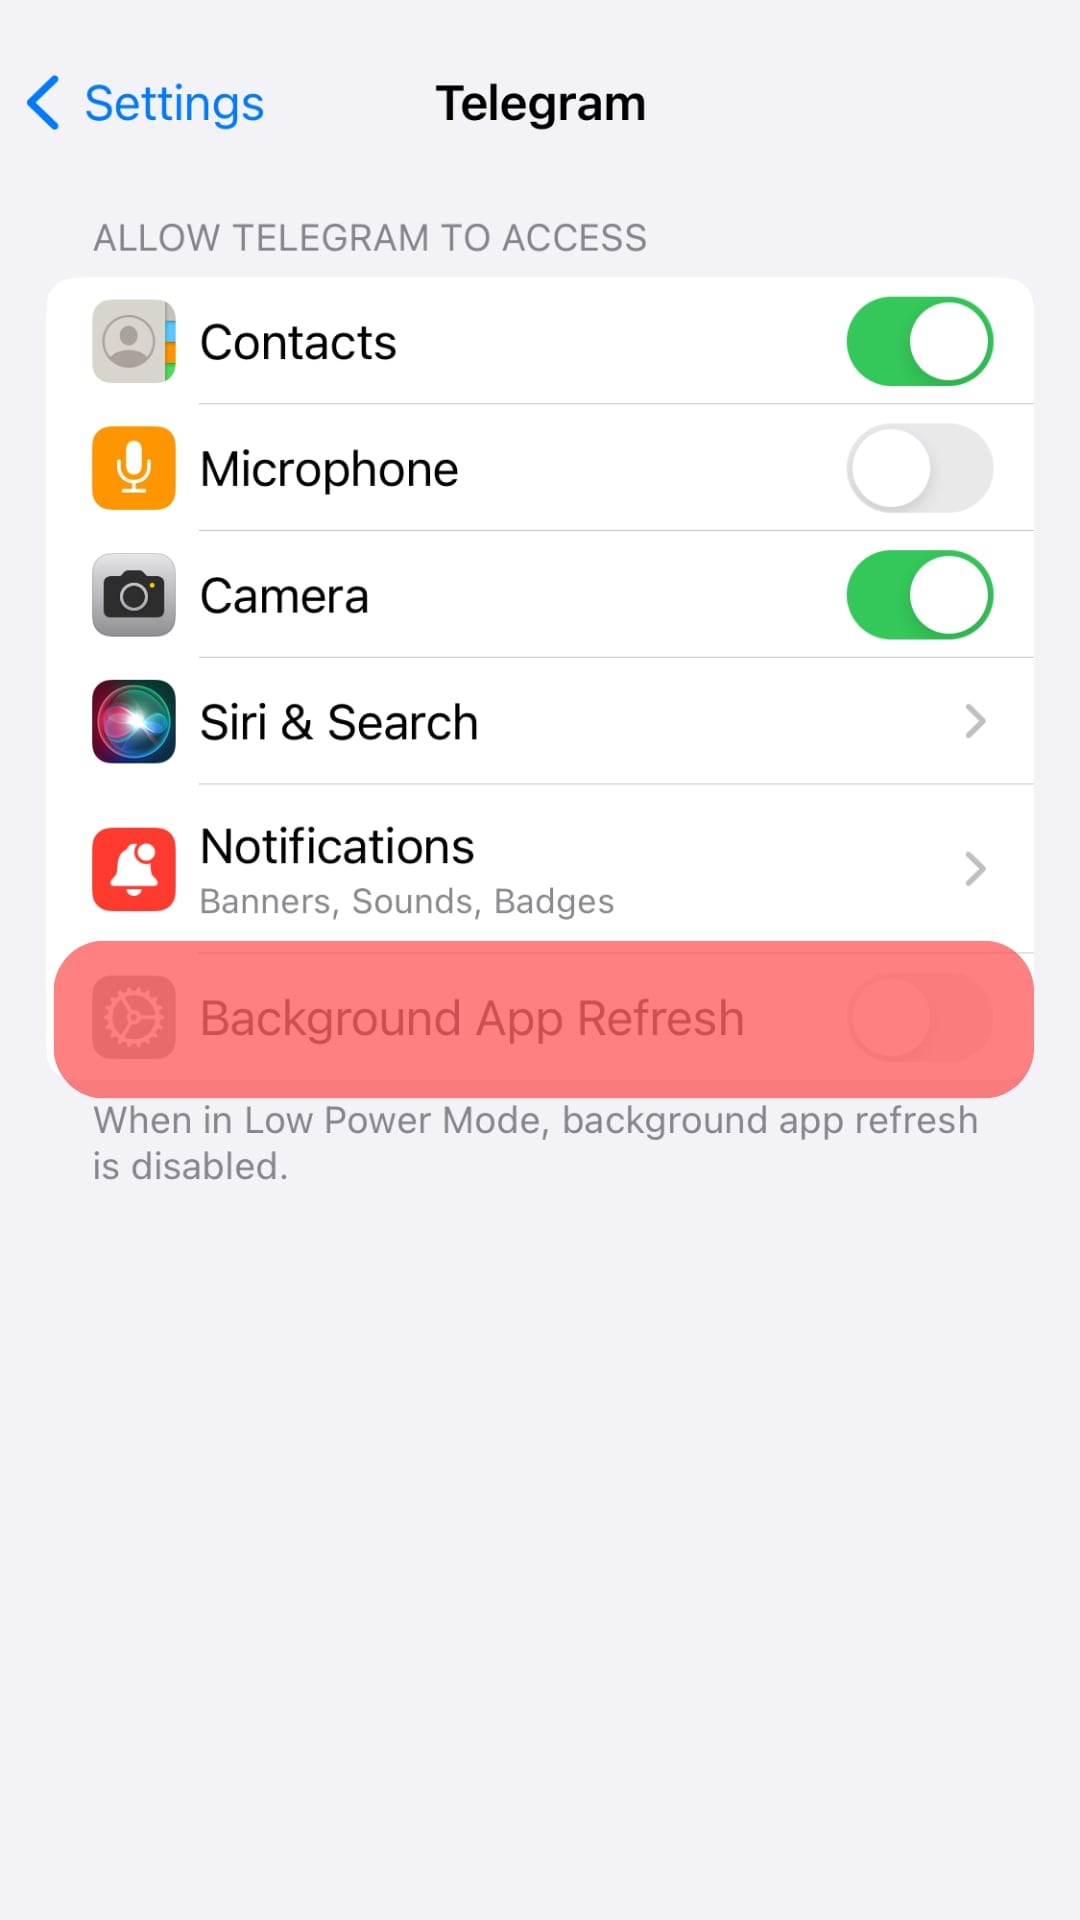 Turn On The “Background App Refresh” Option.